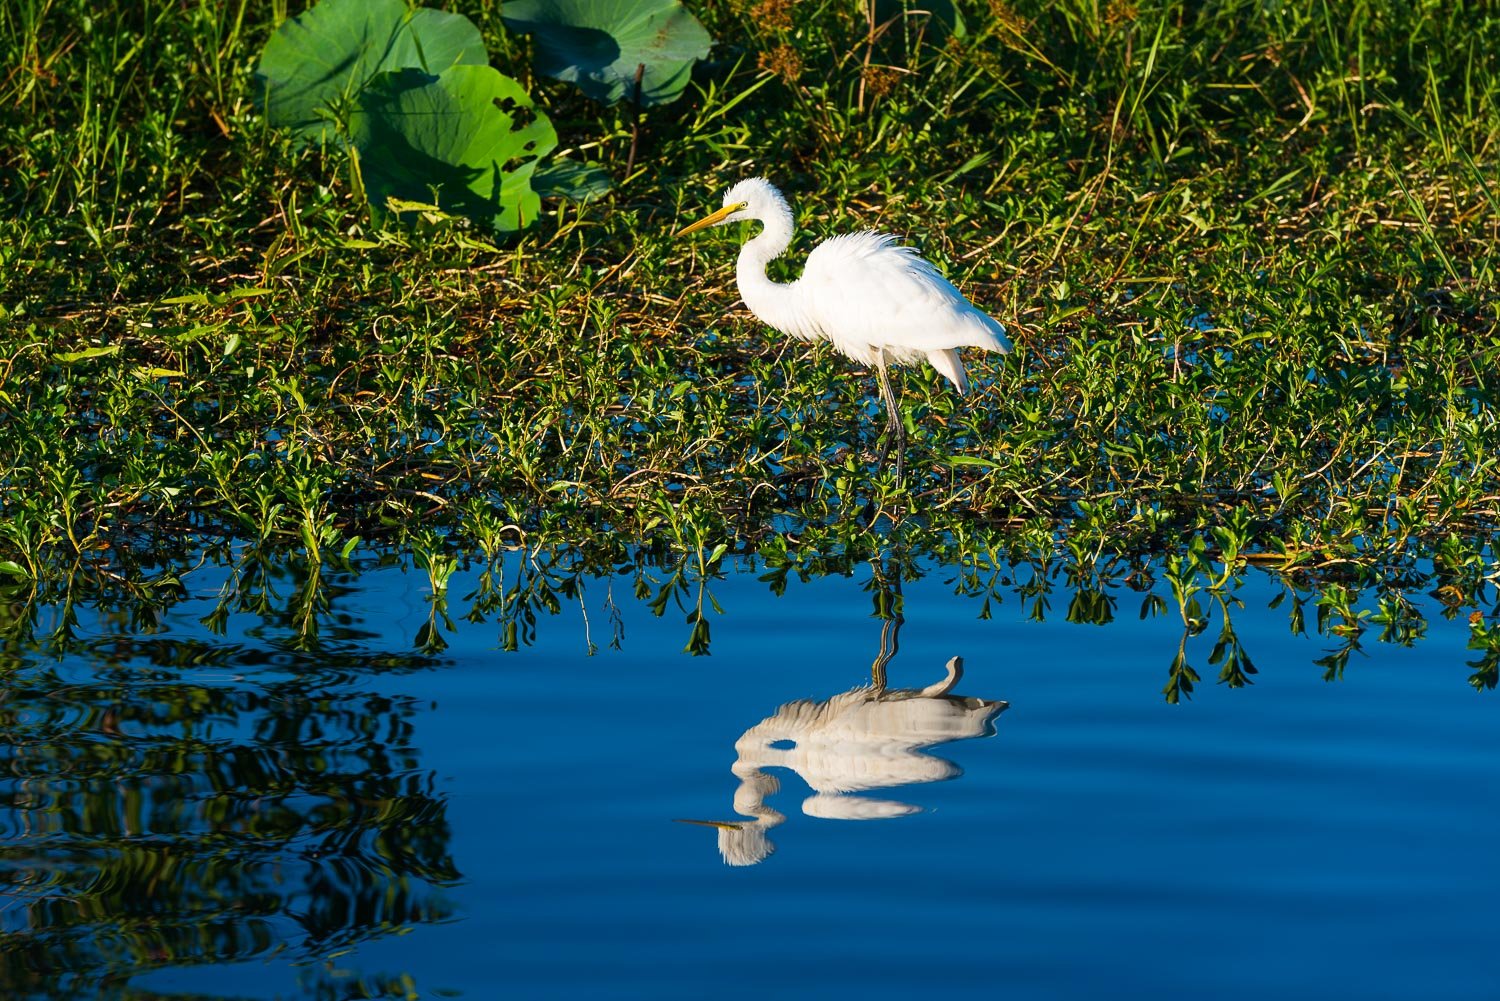 A white duck on the bushes near the dark blue water making a clear reflection in the water with lush greenery in the near background, Arnhem Land 13